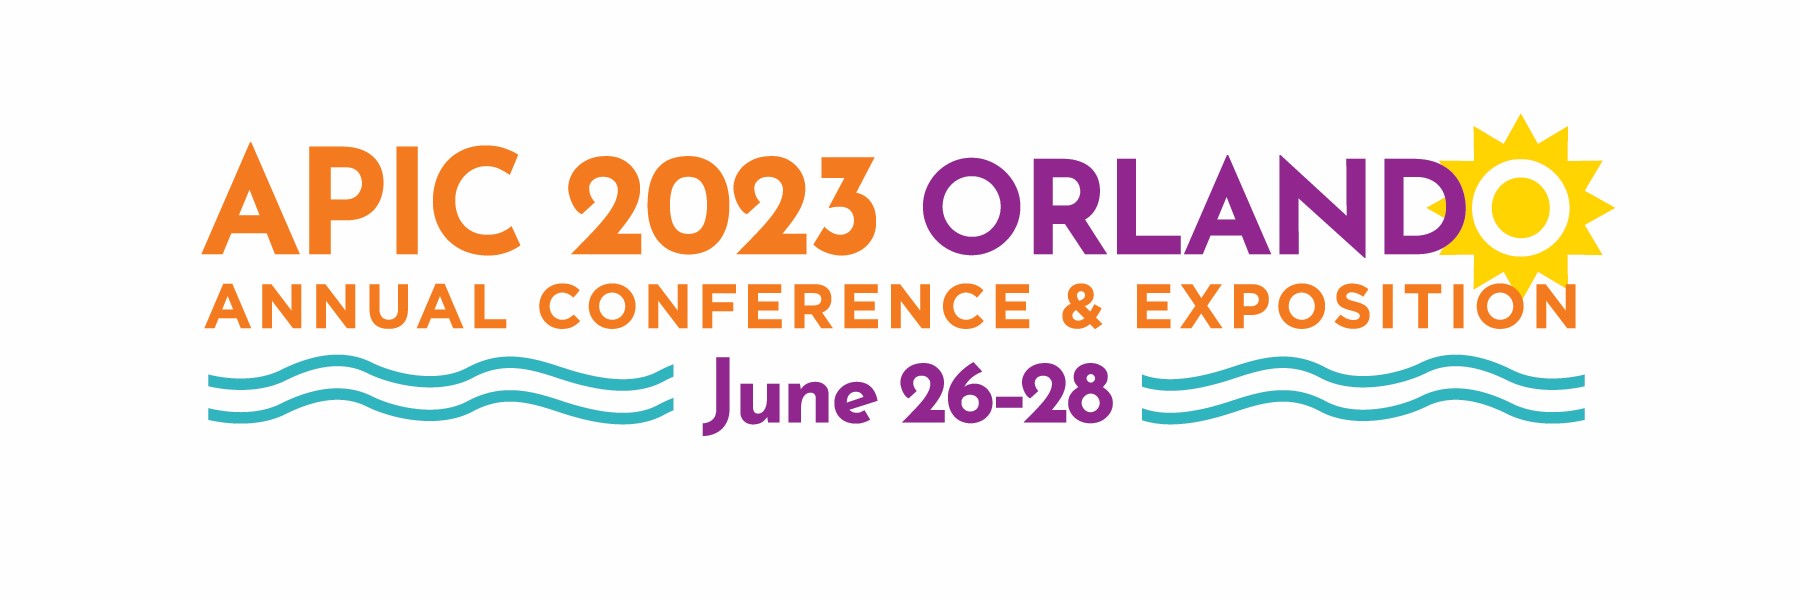 APIC 2023 ORLANDO Annual Conference & Exposition June 26-28